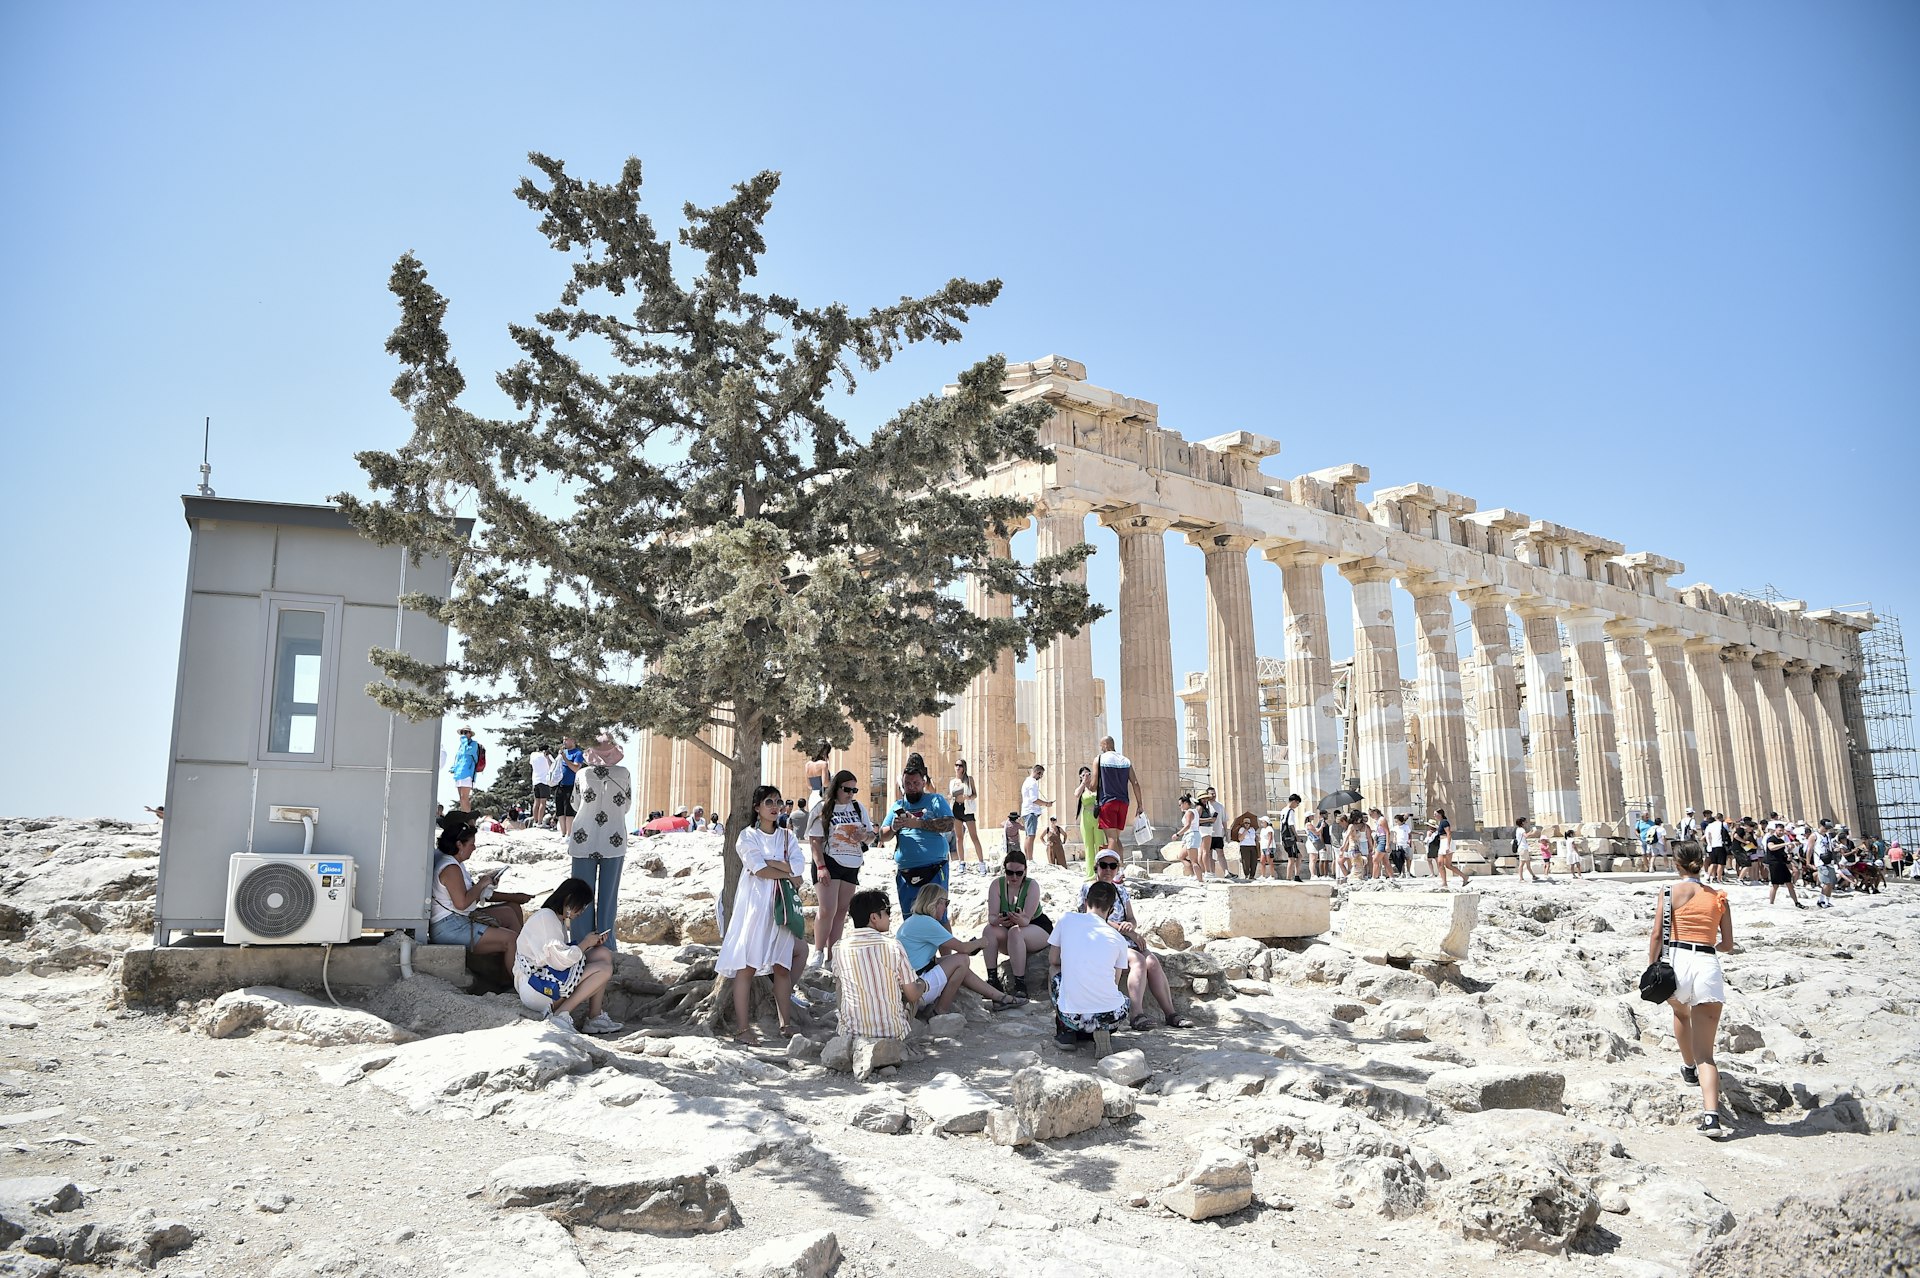 Atop the Acropolis ancient hill with Parthenon temple in background, tourists shelter from the sun under a tree 